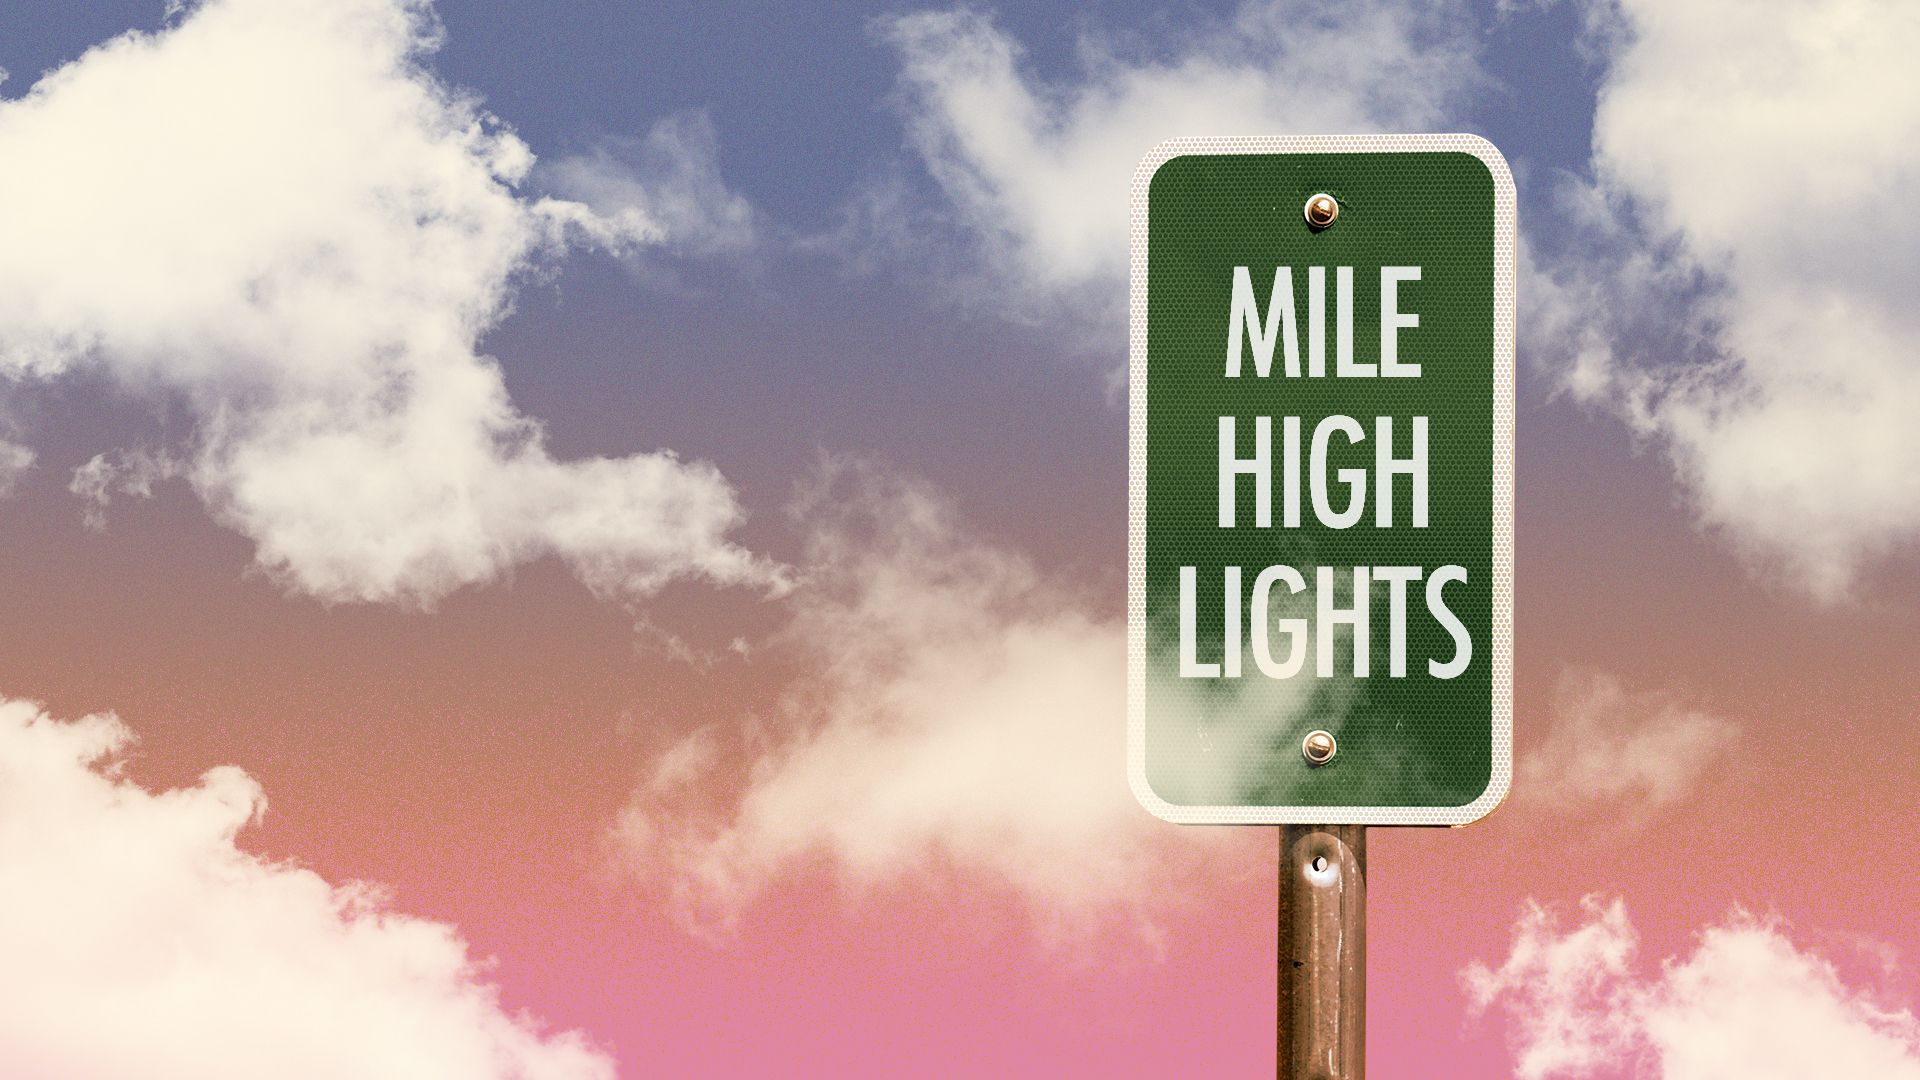 Illustration of a street sign that says "Mile Highlights" surrounded by clouds in the sky.